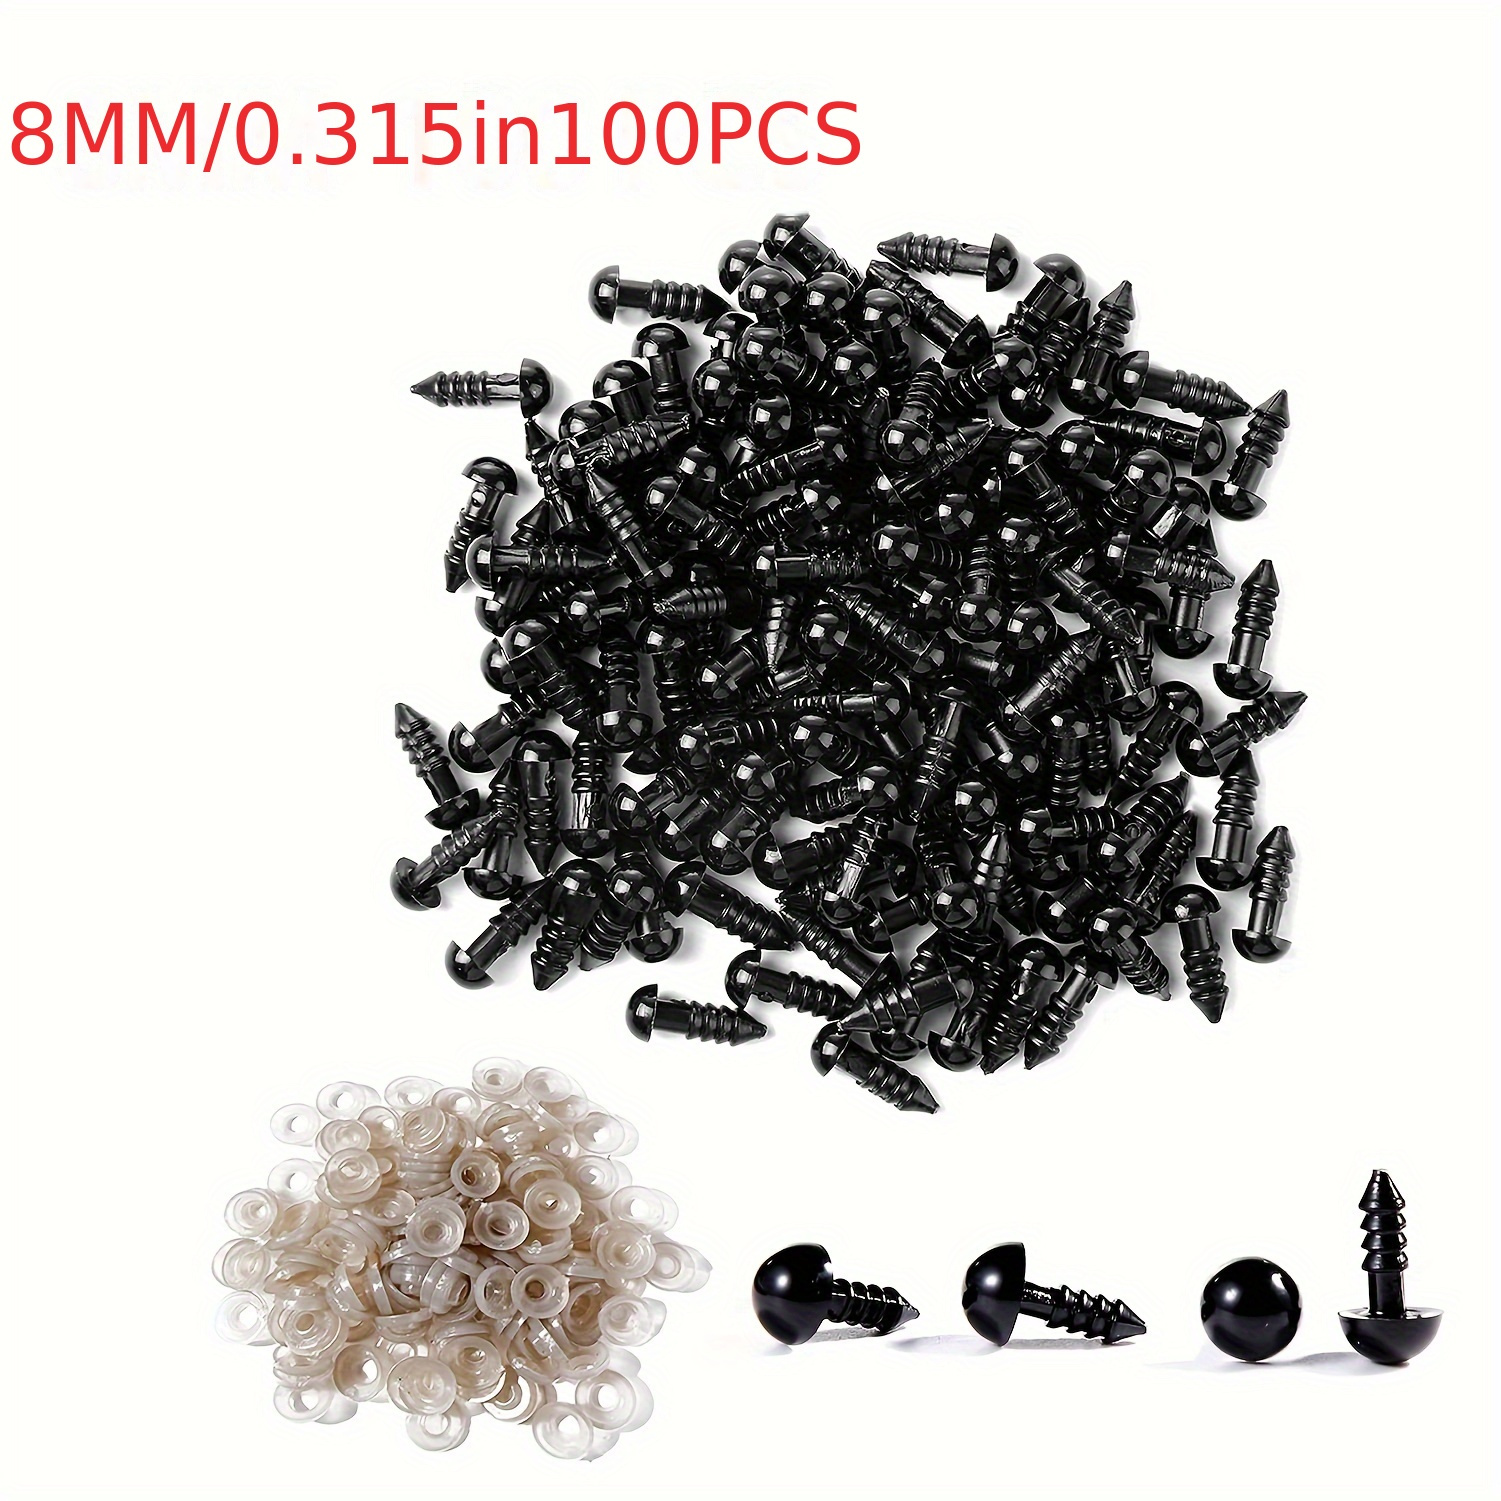 100pcs Plastic Safety Crochet Eyes With Washers For Crochet Crafts Doll Eyes